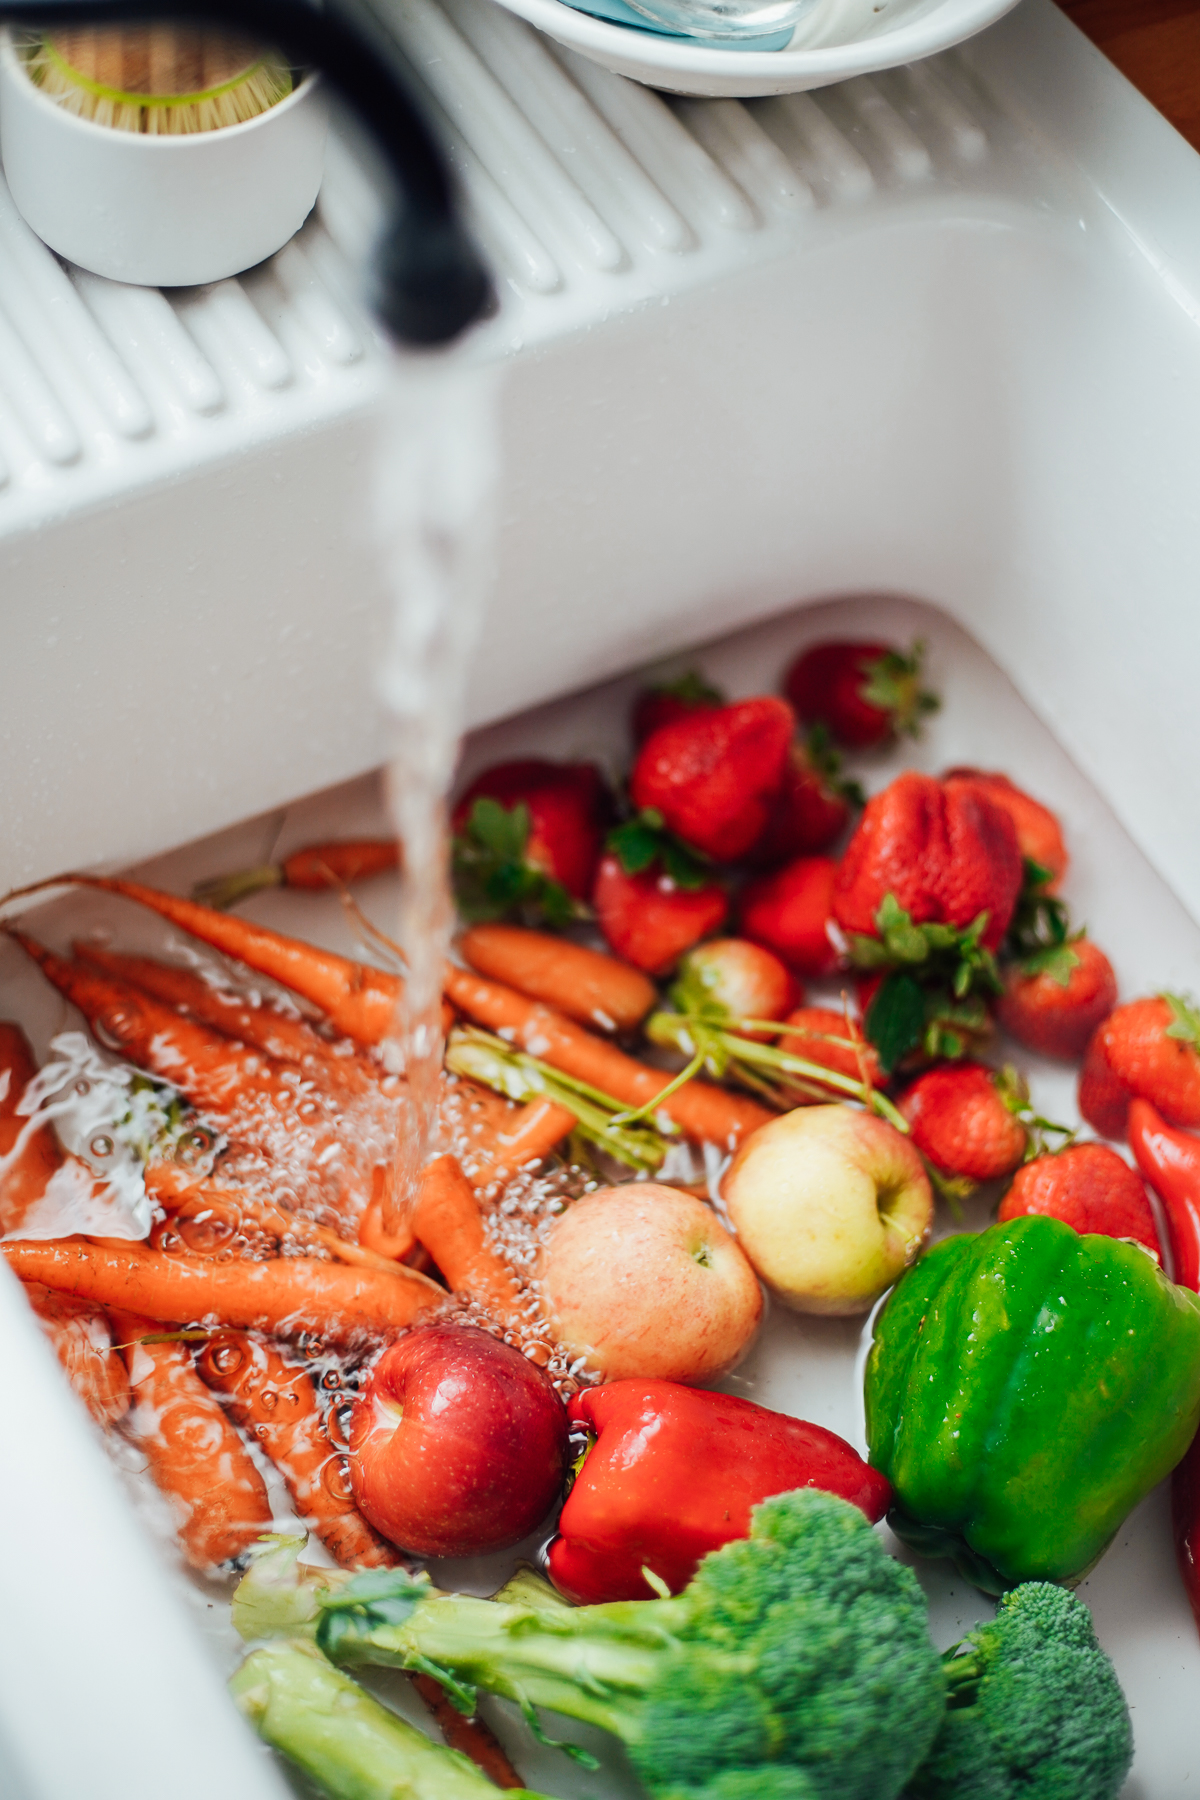 Fruits and vegetables in a sink being filled with water for a homemade produce wash.